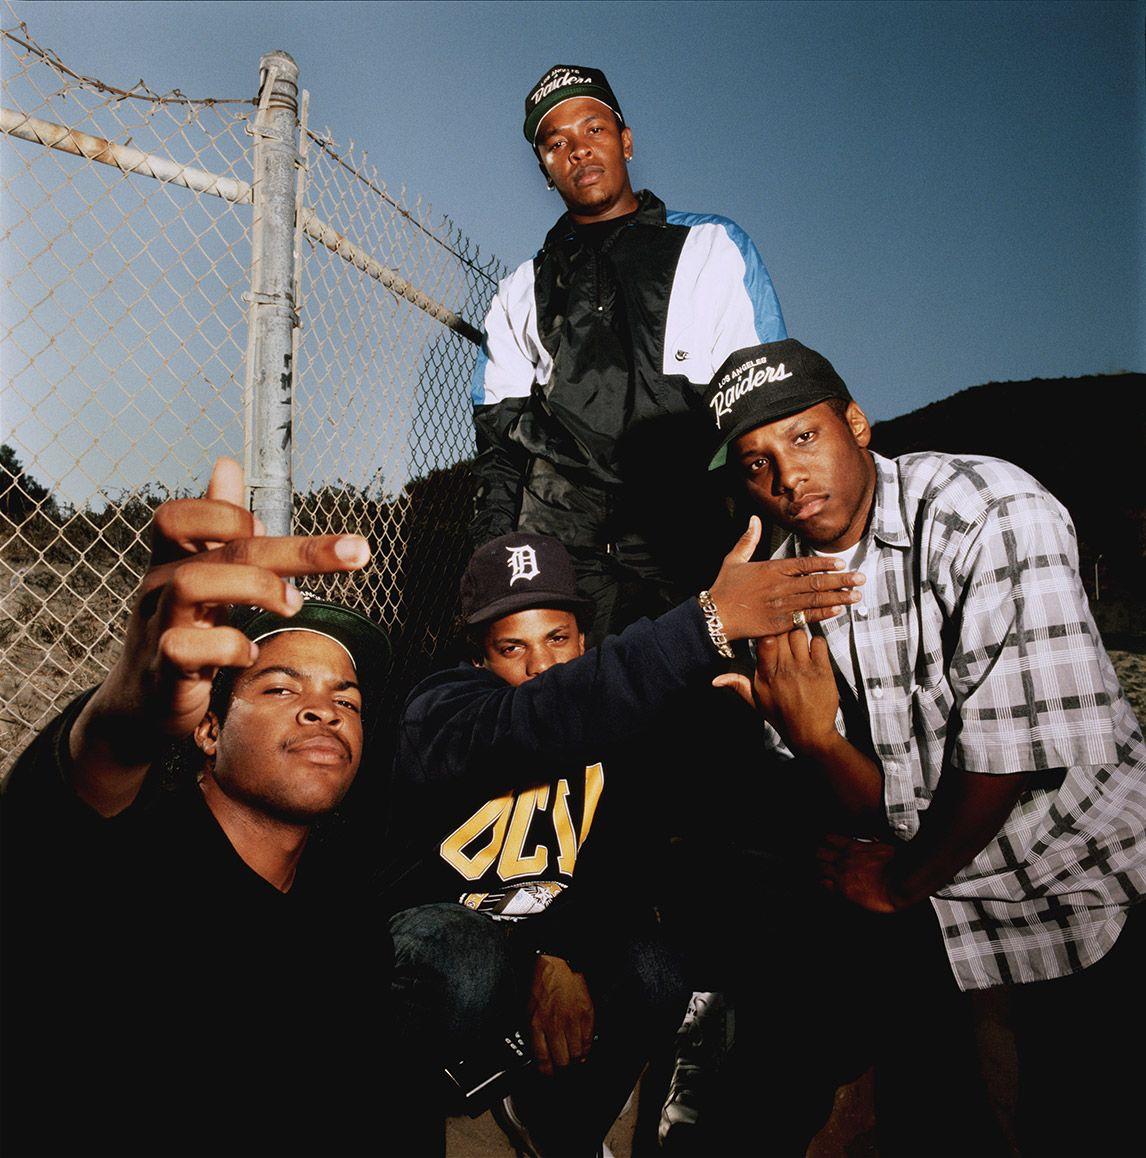 NWA HD Wallpapers and Backgrounds